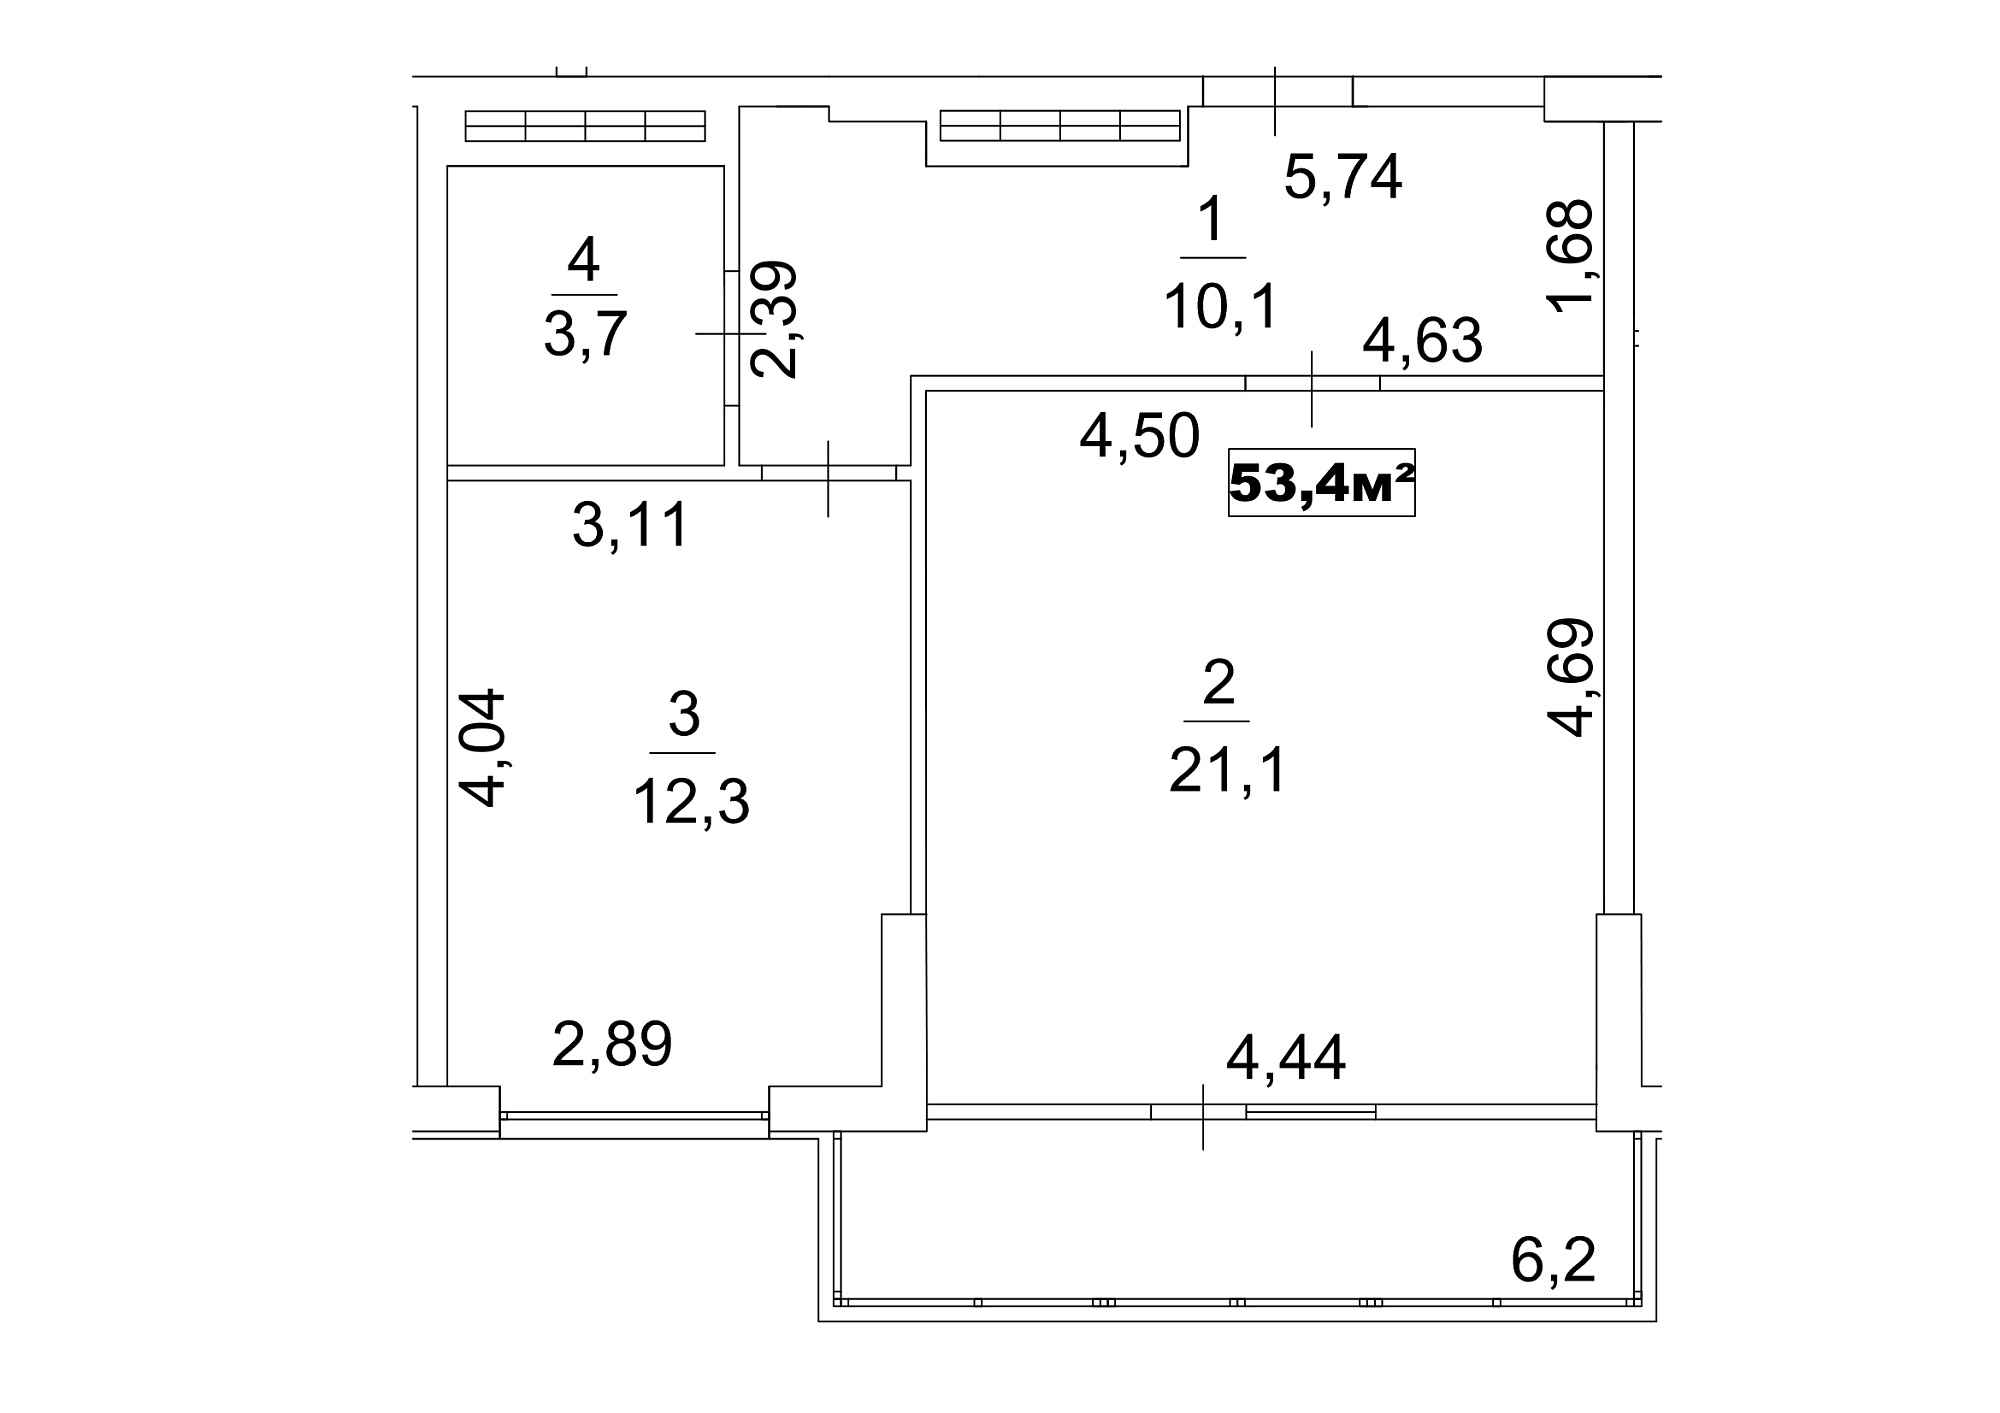 Planning 1-rm flats area 53.4m2, AB-13-01/00002.